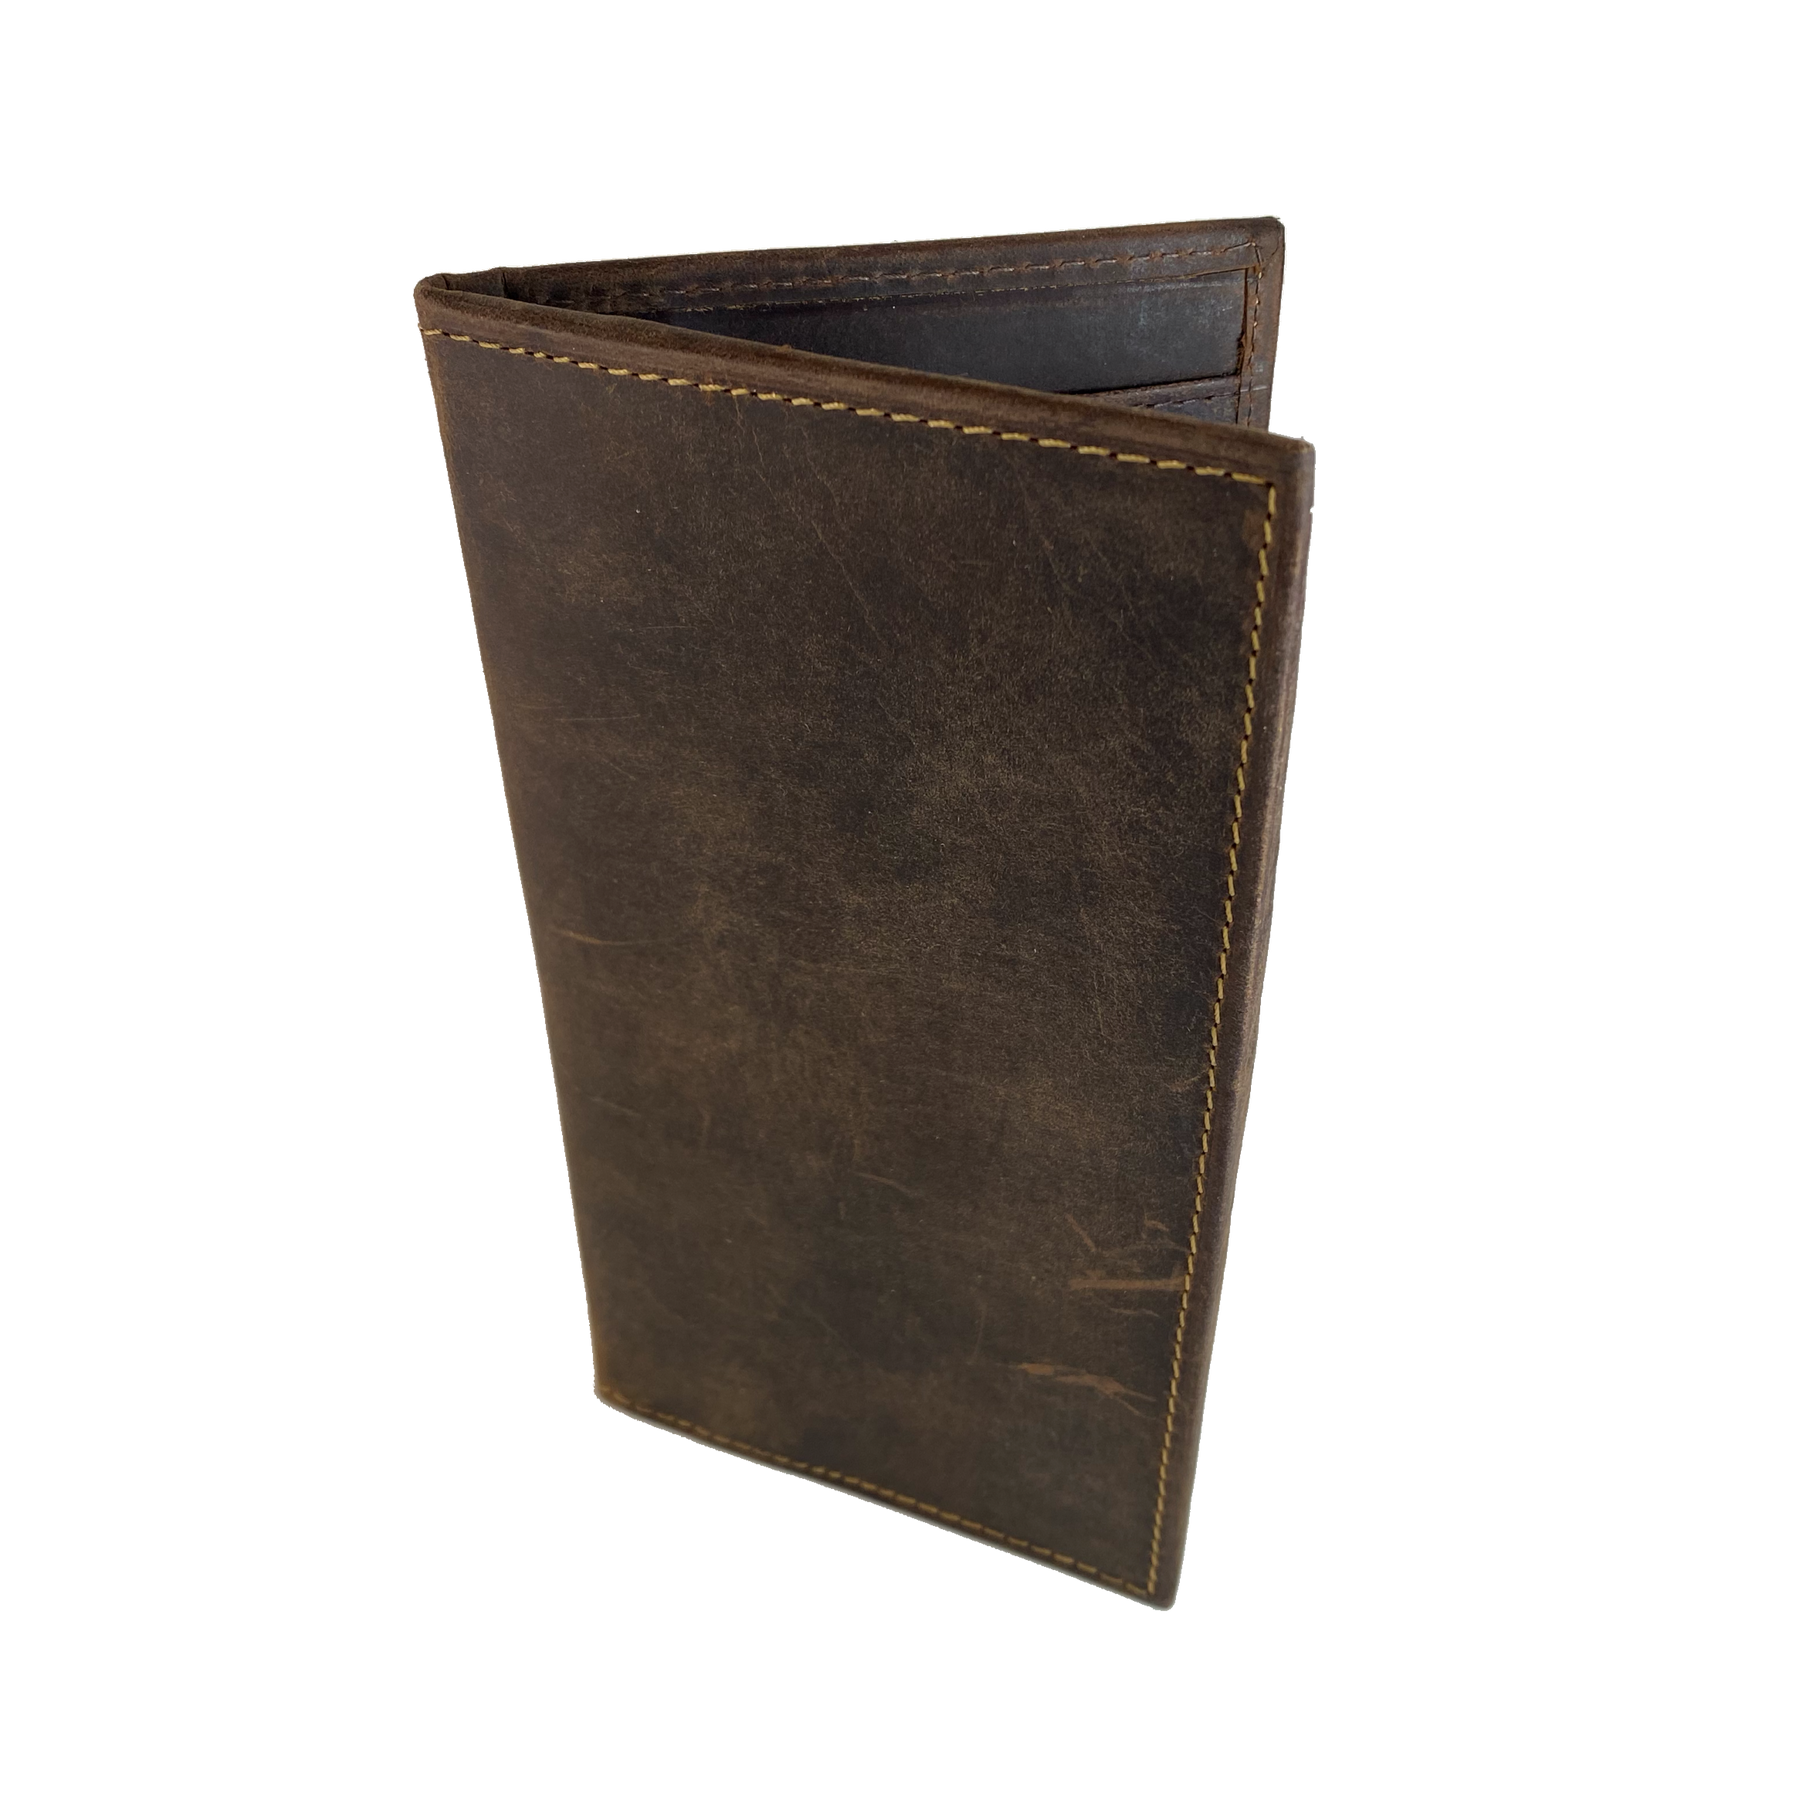 Mens Luxury Wallets - shop online for mens designer wallets and accessories